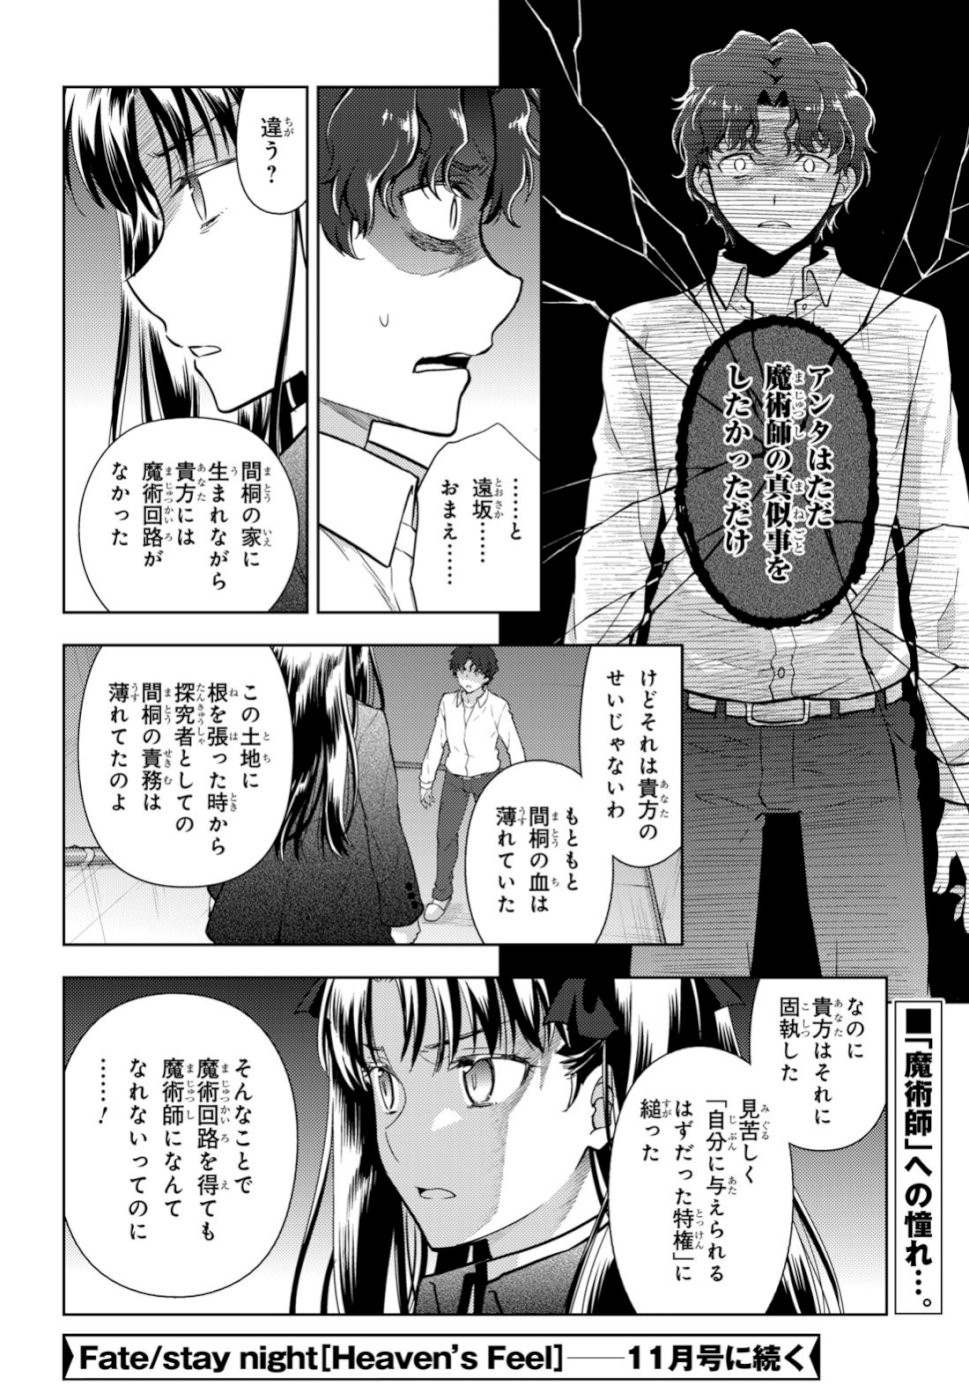 Fate/Stay night Heaven's Feel - Chapter 51 - Page 12